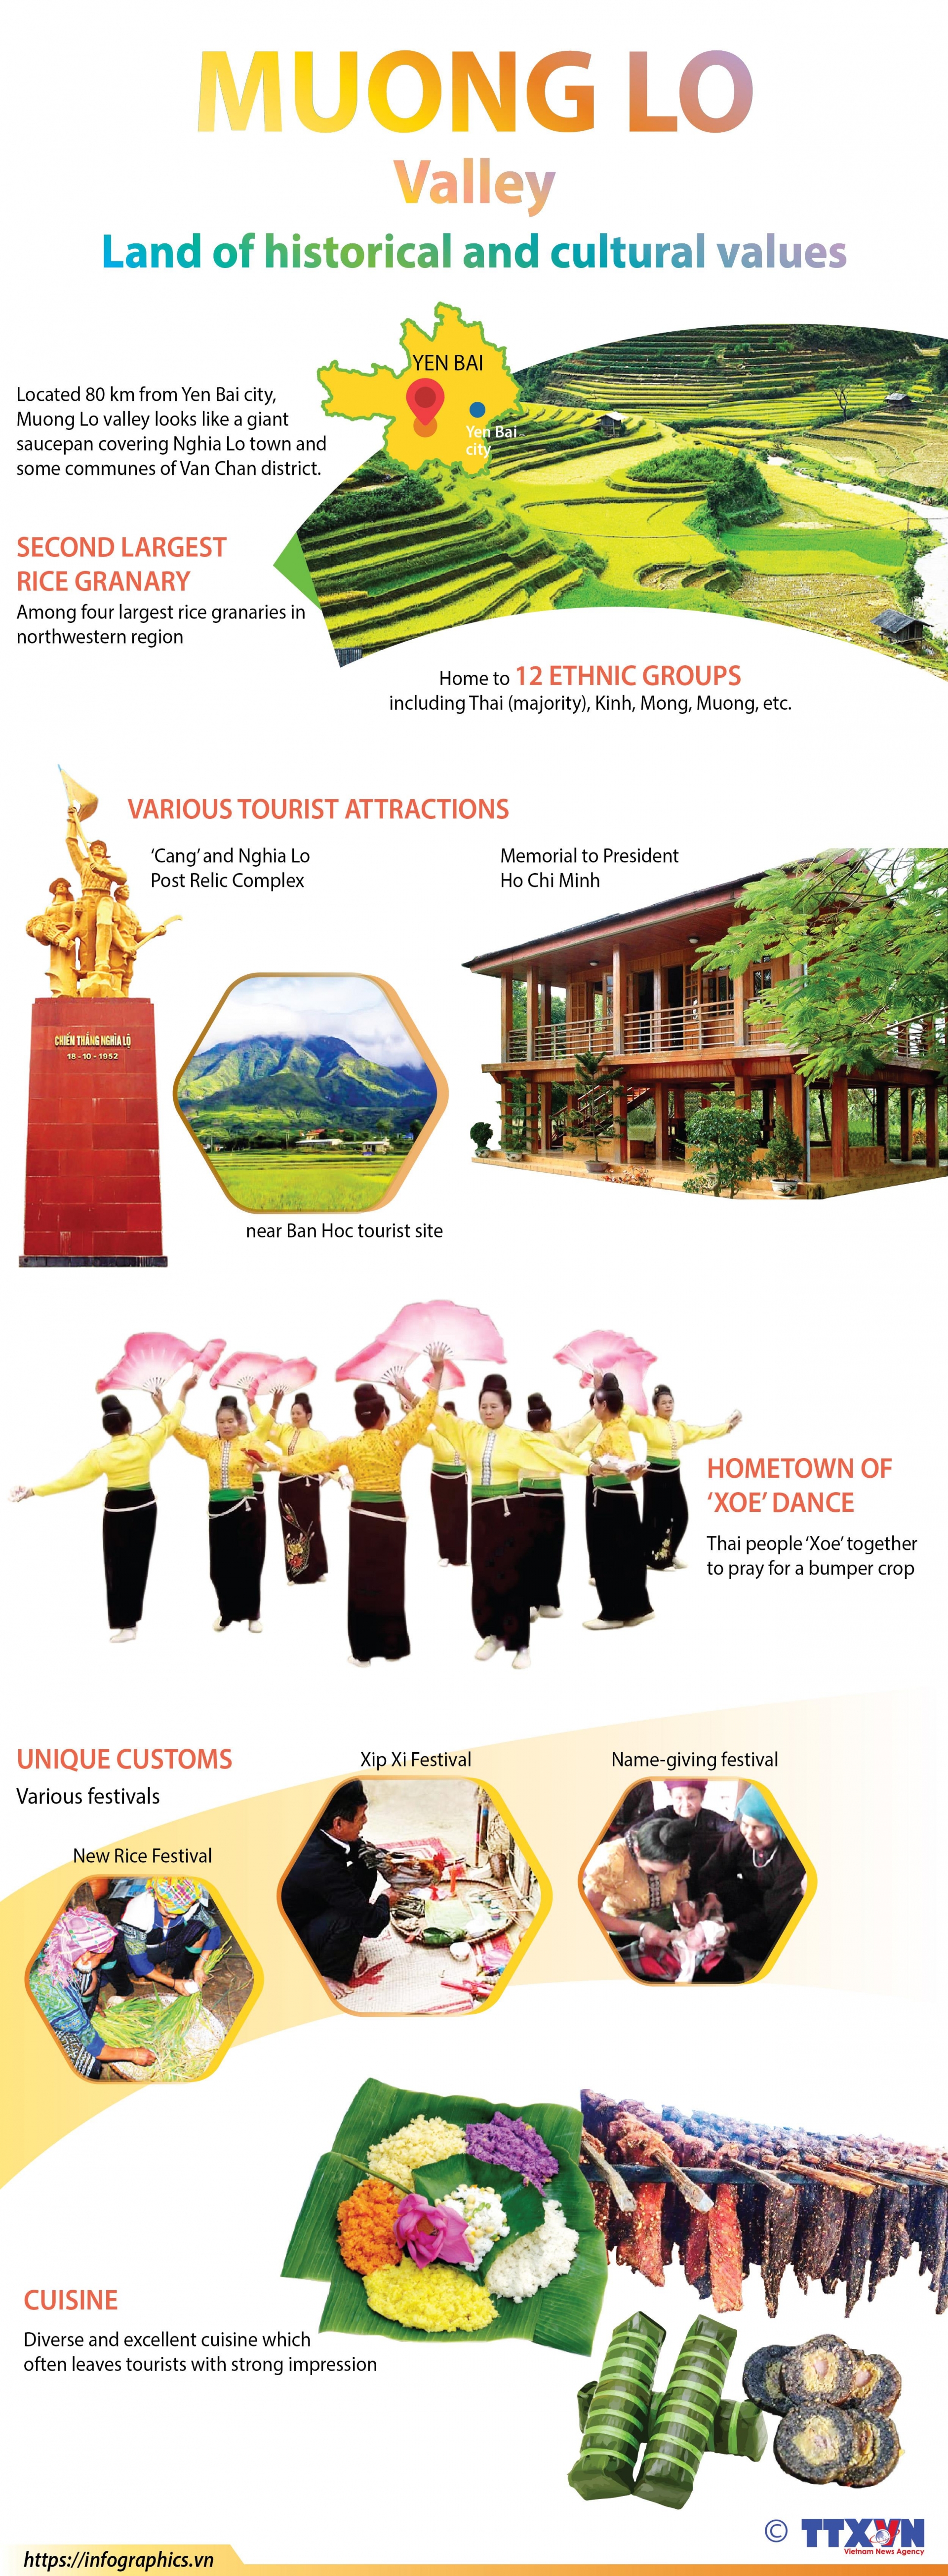 muong lo valley land of historical and cultural values